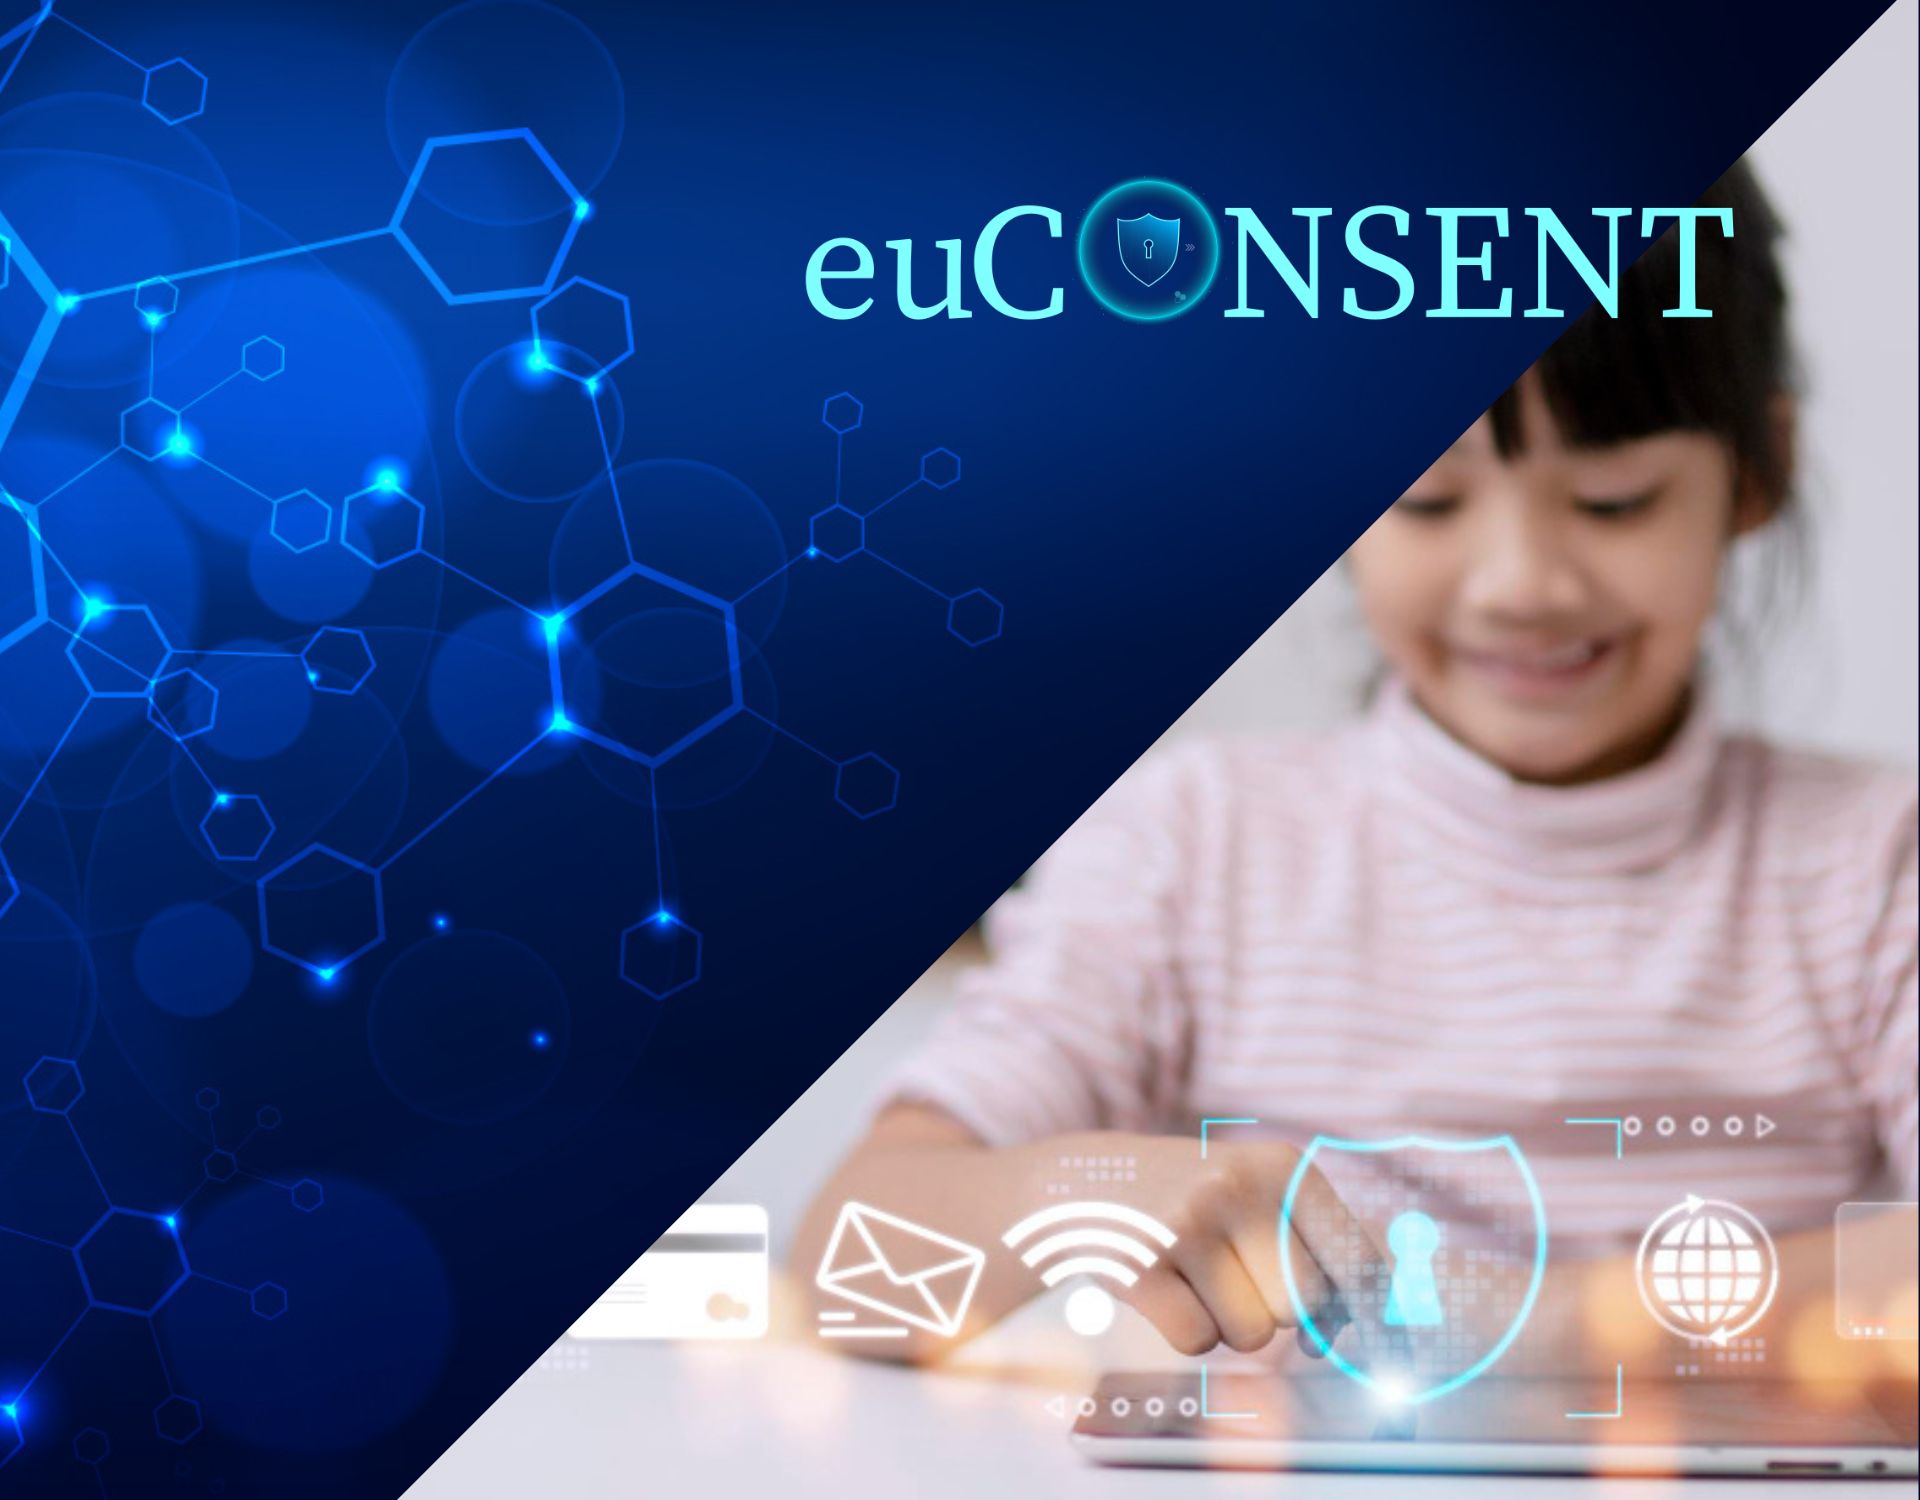 Summary of the achievements and lessons learned of the euCONSENT project